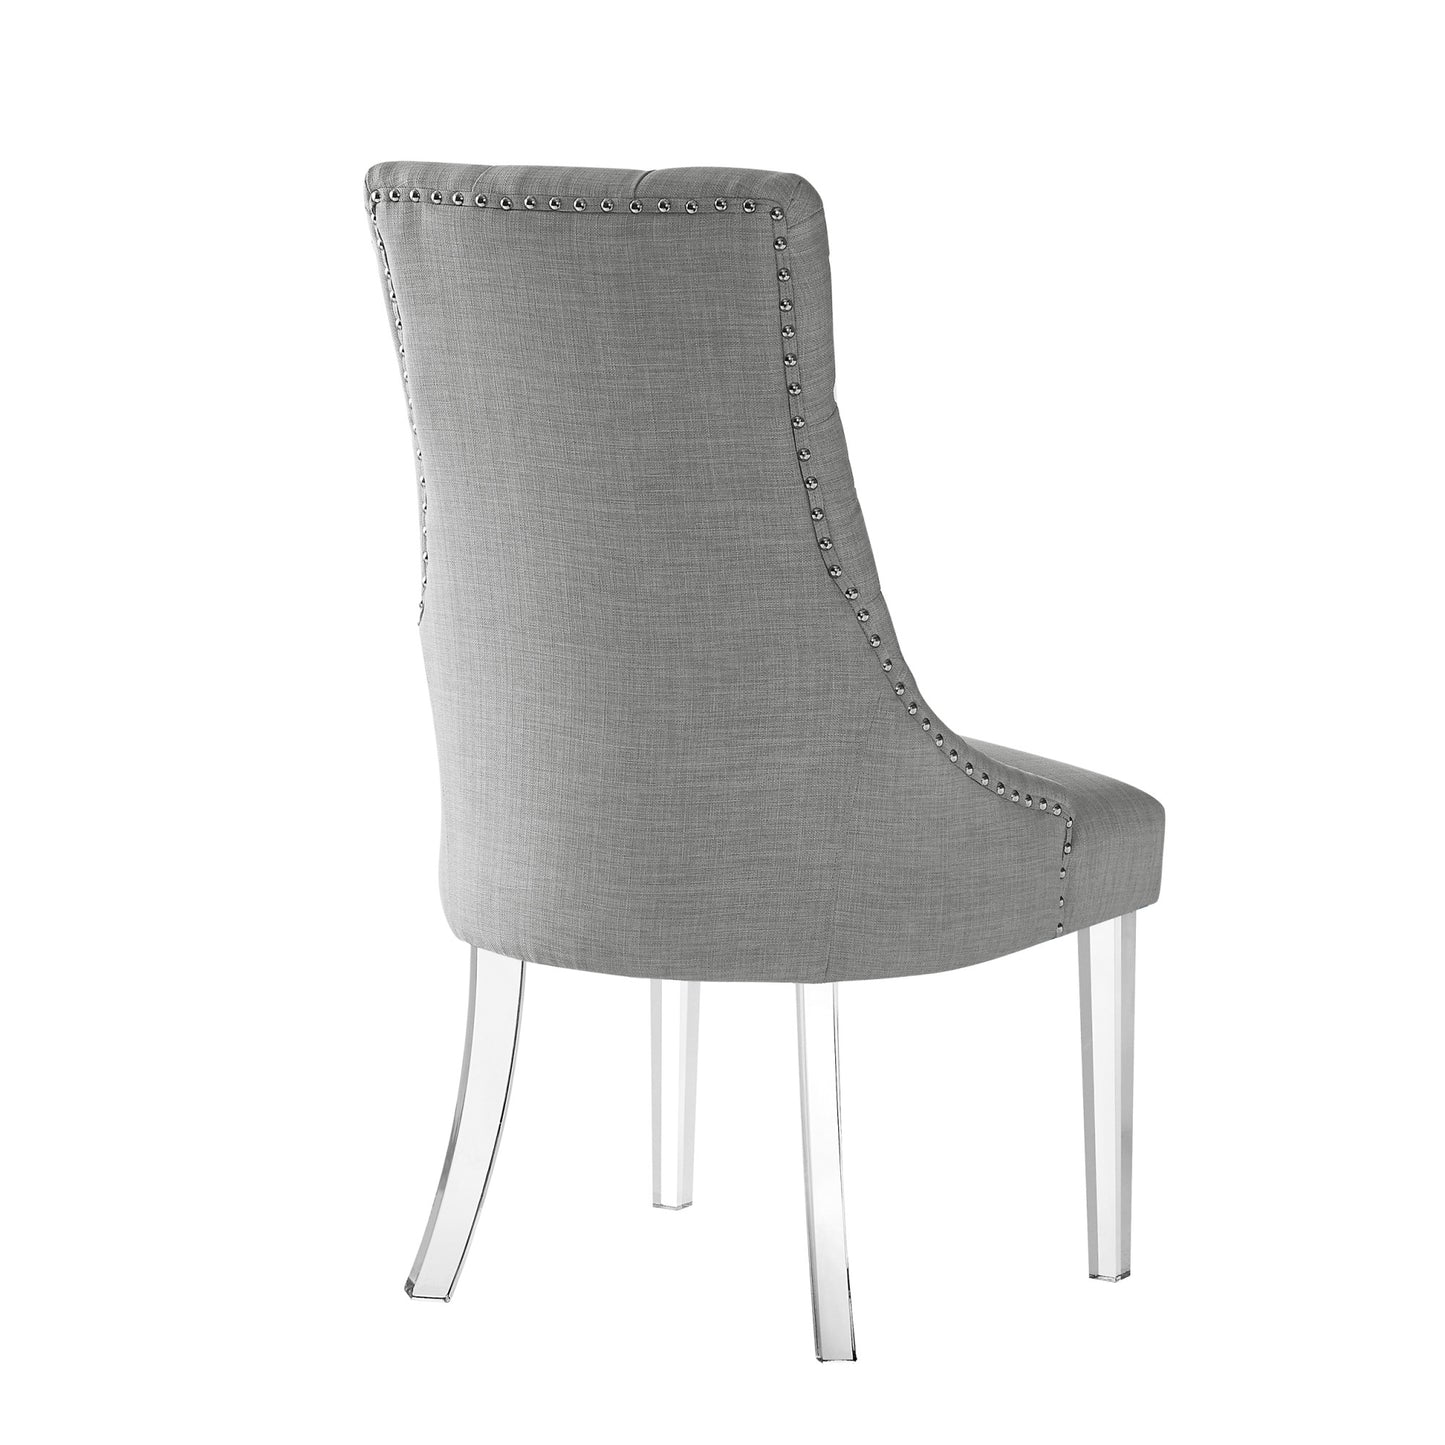 Set of Two Tufted Light Gray and Clear Upholstered Linen Dining Side Chairs